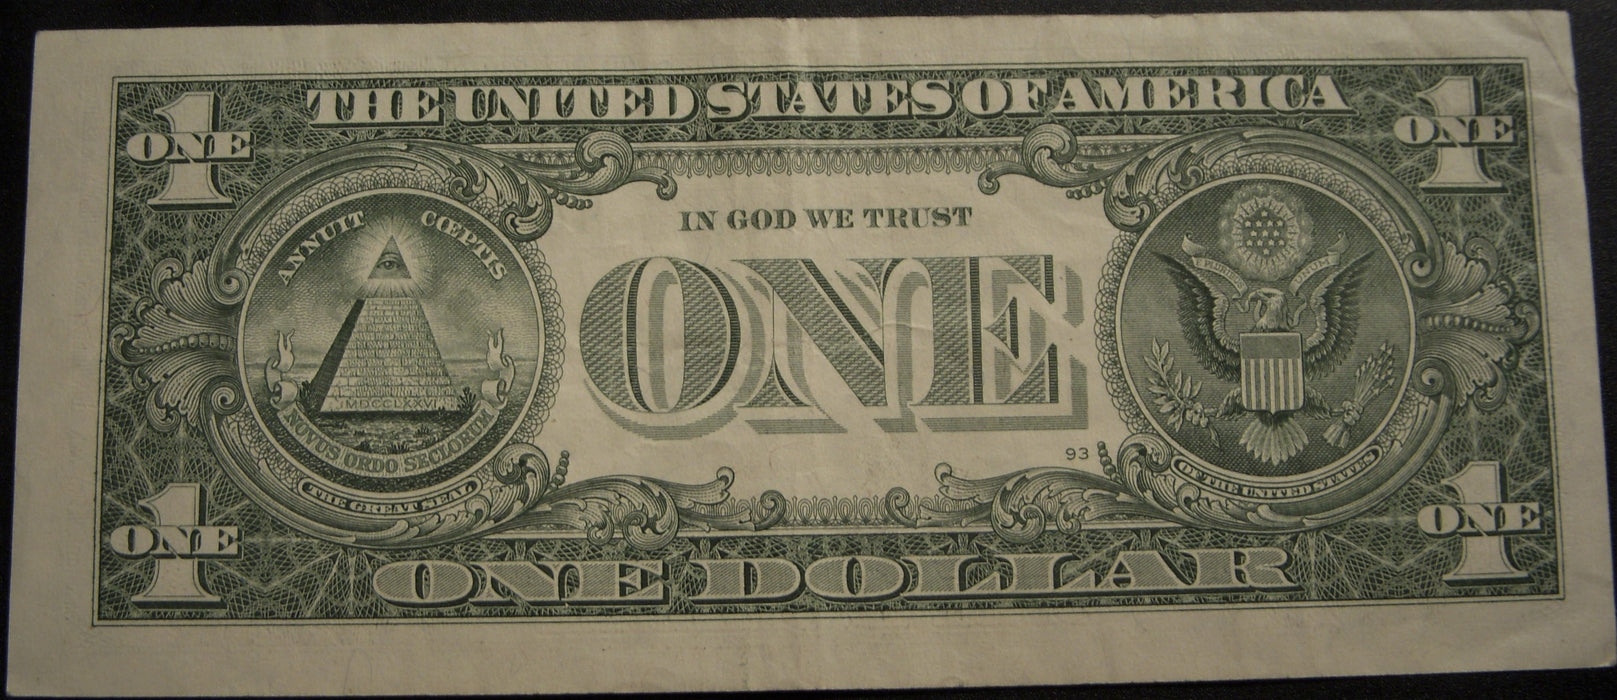 2013 (H) $1 Federal Reserve Note - STAR Note